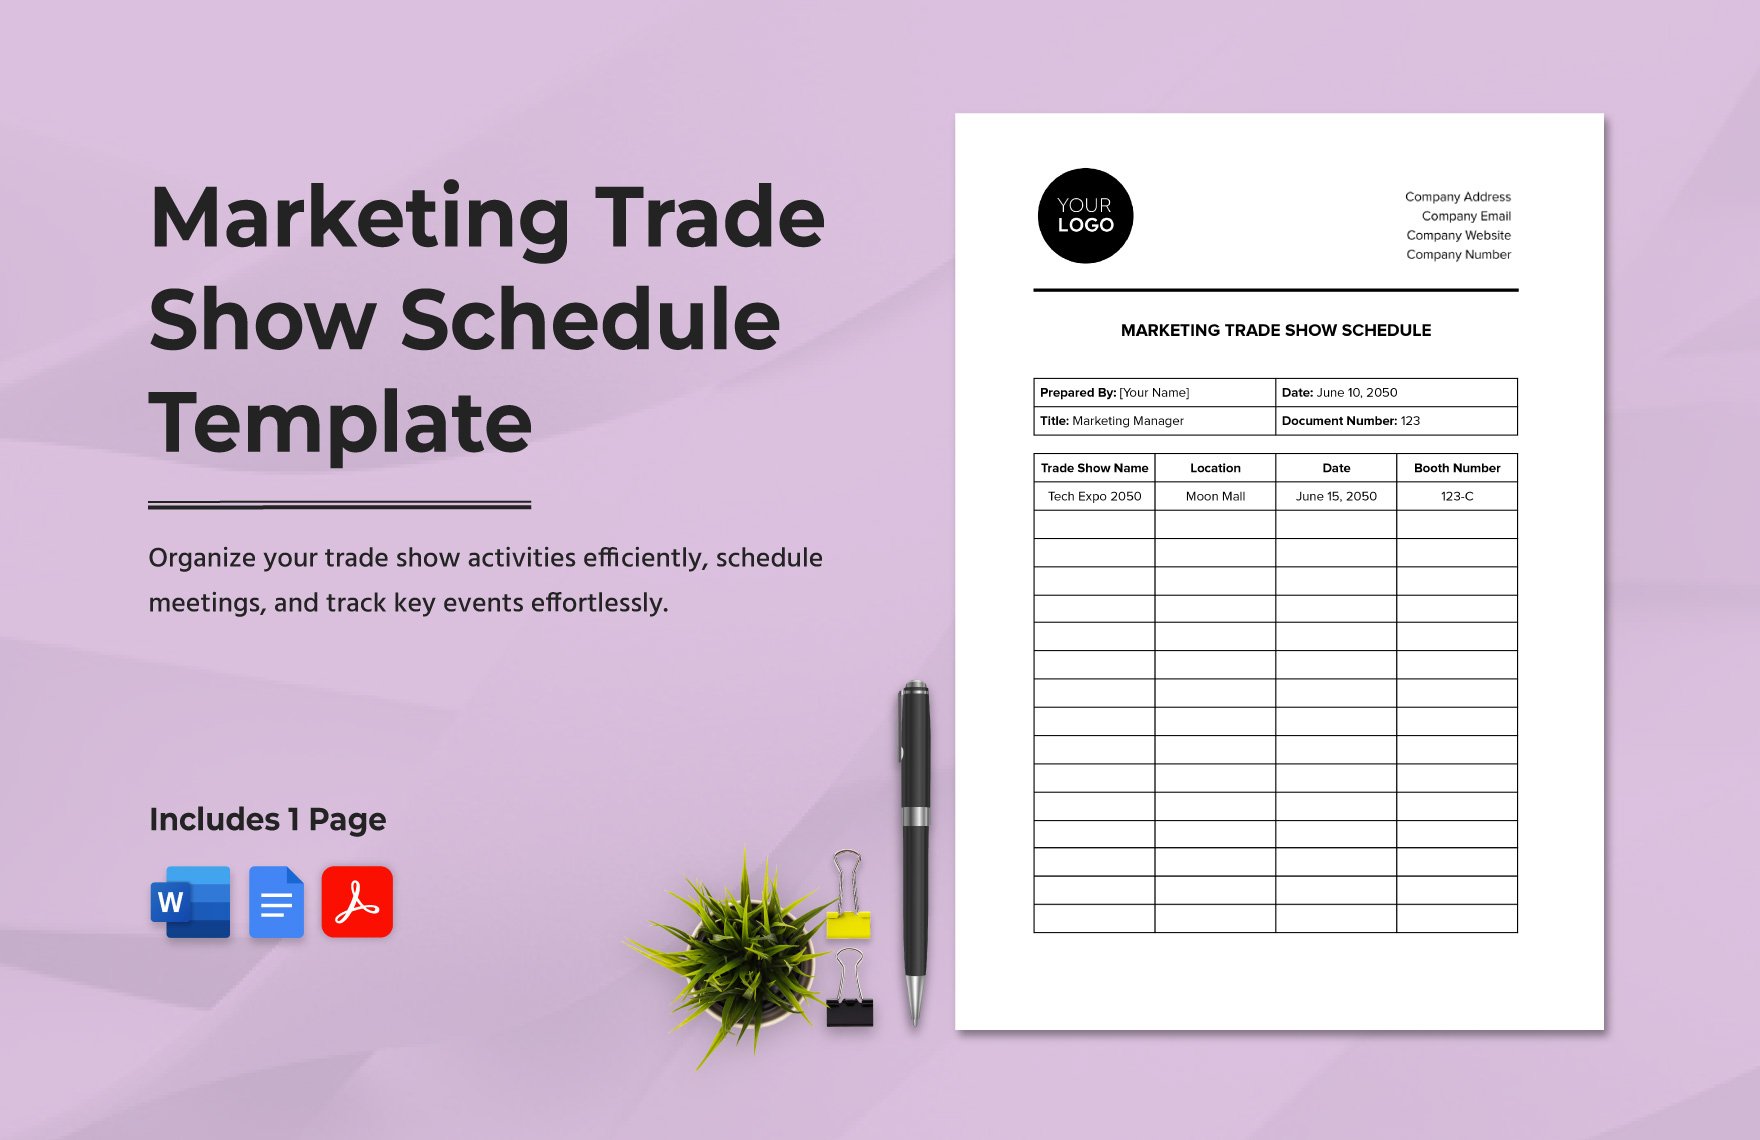 Marketing Trade Show Schedule Template in Word, Google Docs, PDF